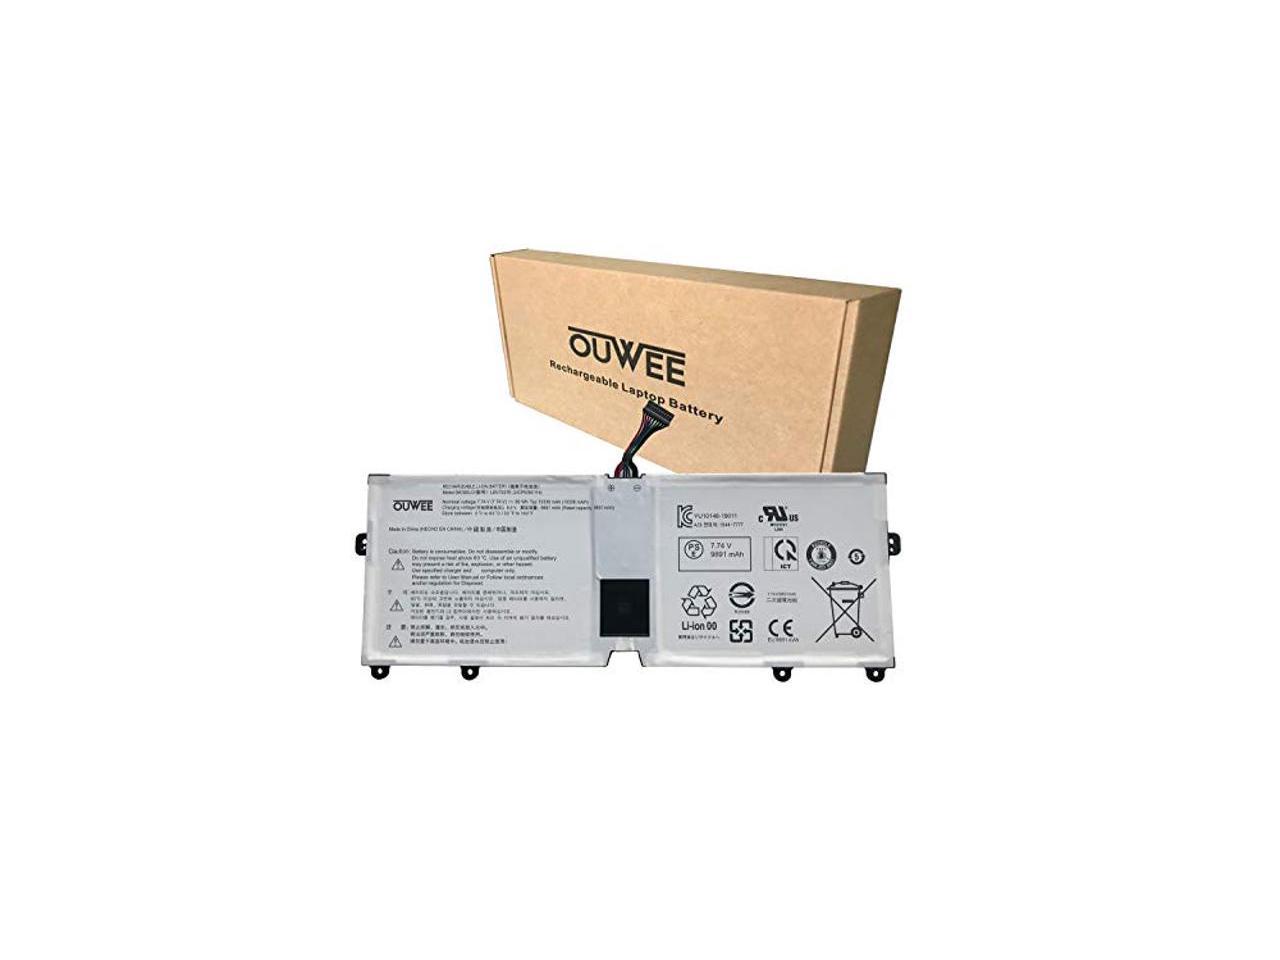 OUWEE LBV7227E Laptop Battery Compatible with LG Gram 15Z90N 17Z90N